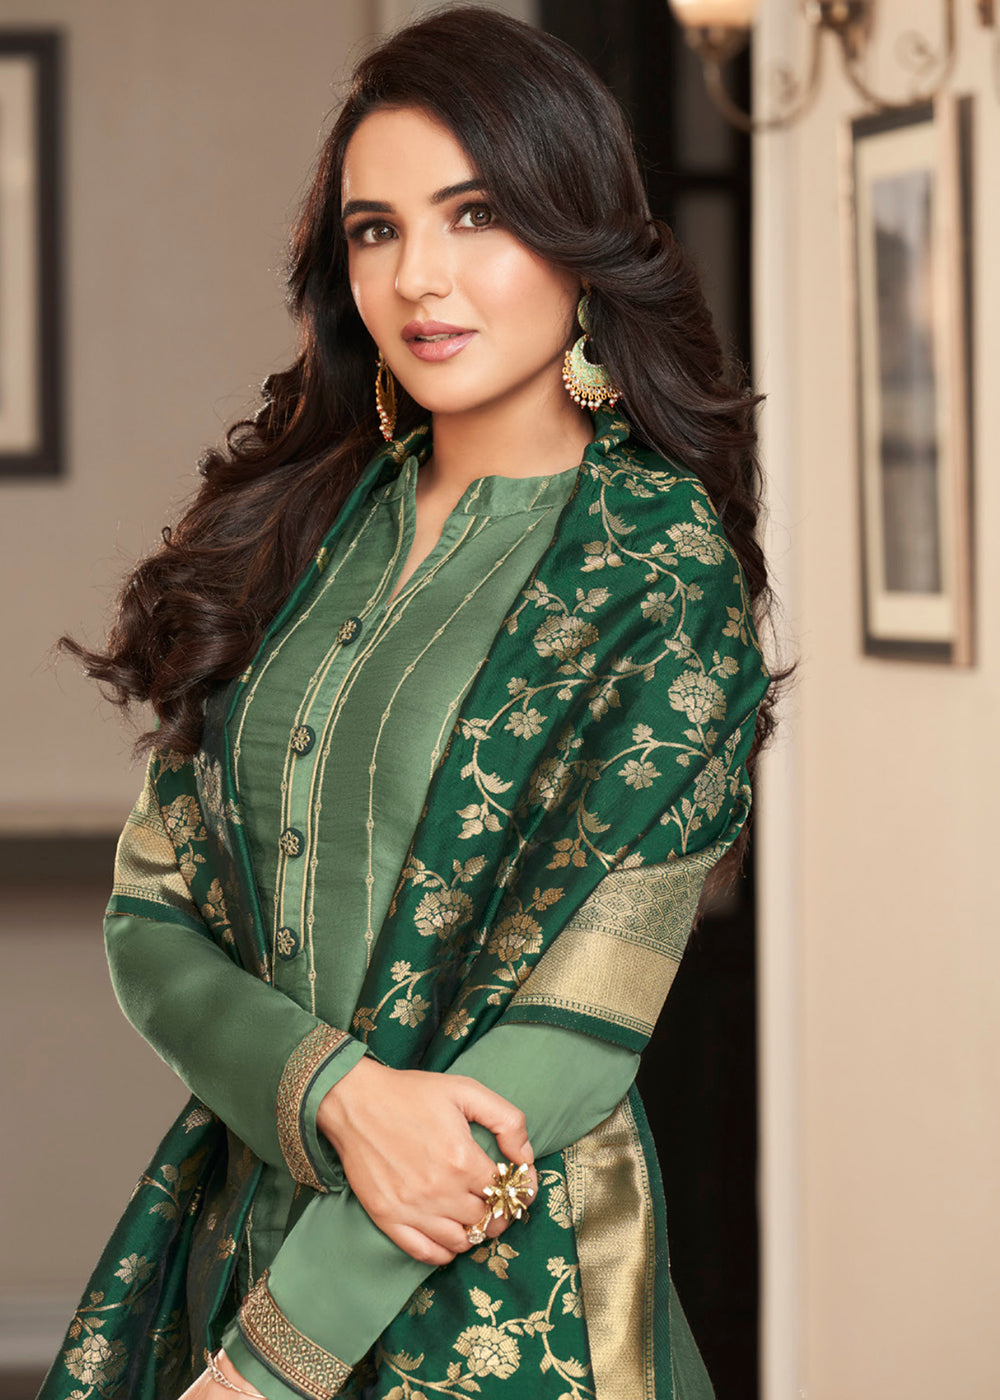 Buy Now Forest Green Traditional Silk Embroidered Salwar Suit Online in USA, UK, Canada, Germany & Worldwide at Empress Clothing.